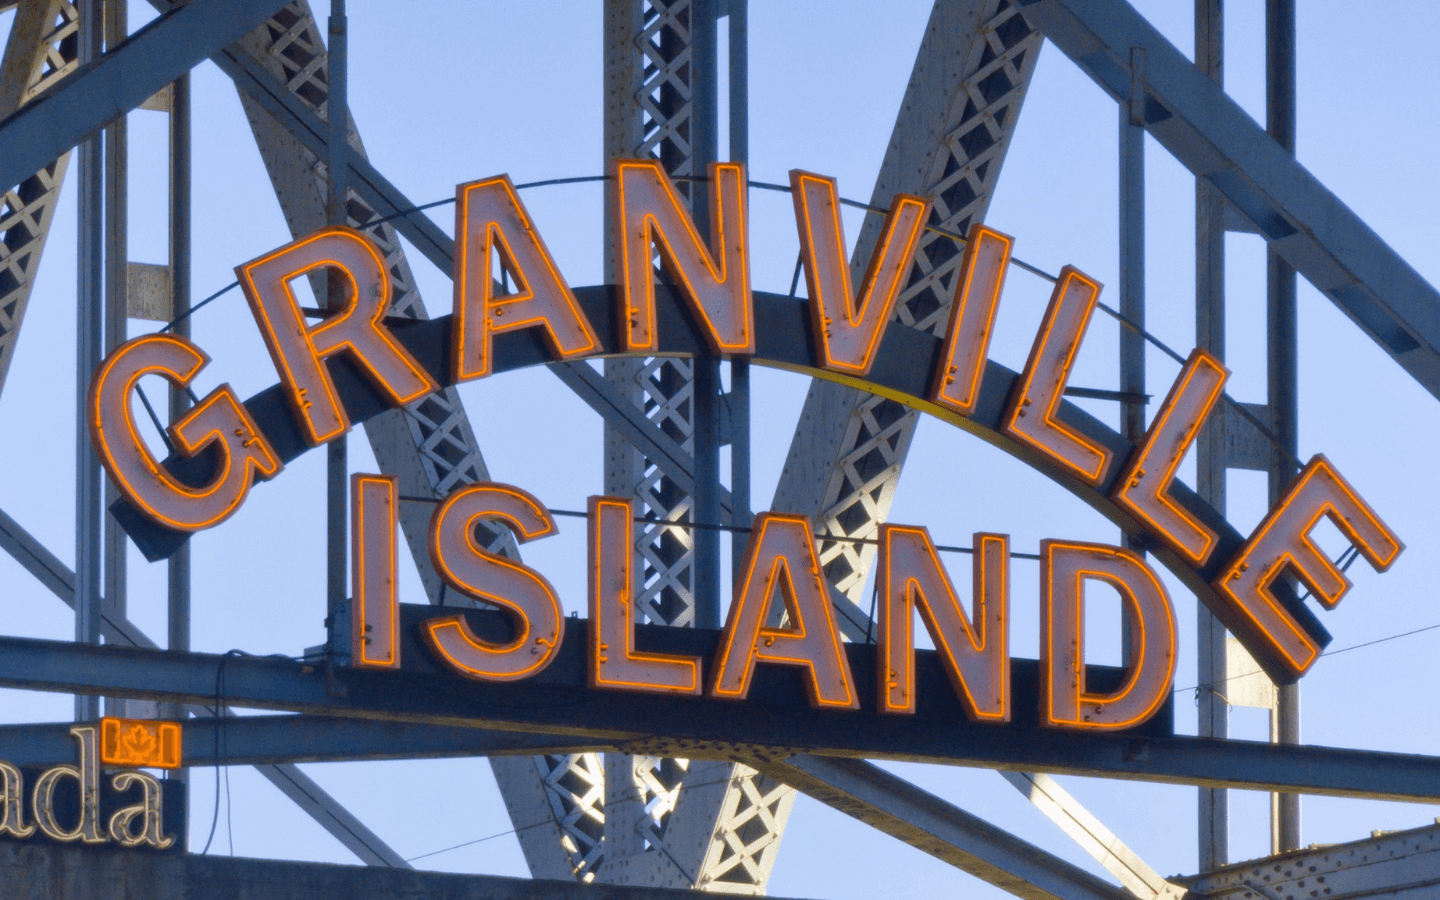 A close-up image of the Granville Island entryway sign.